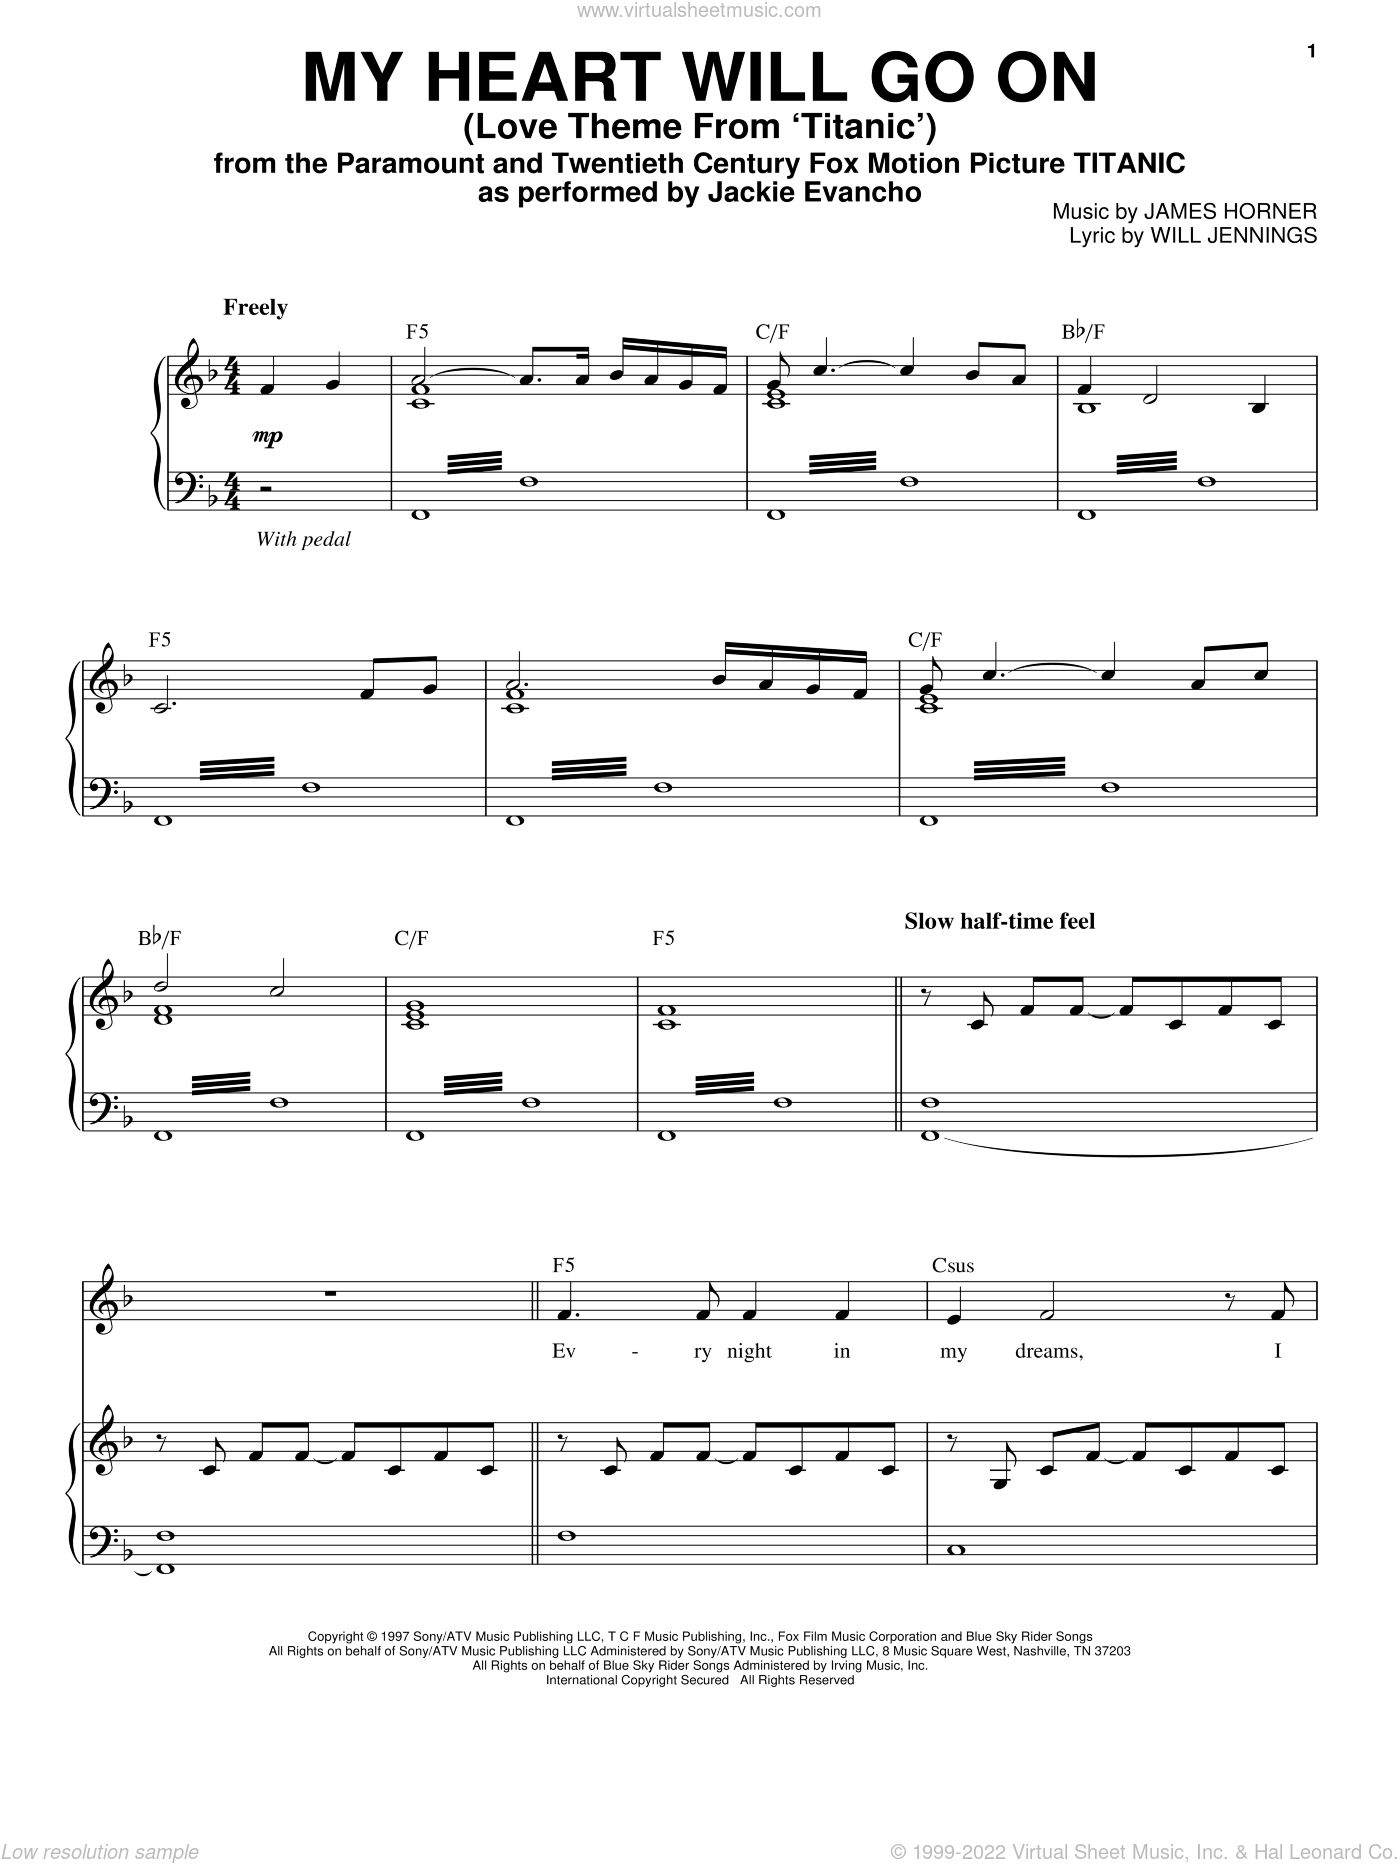 My Heart Will Go On (Love Theme from Titanic) sheet music for voice and  piano